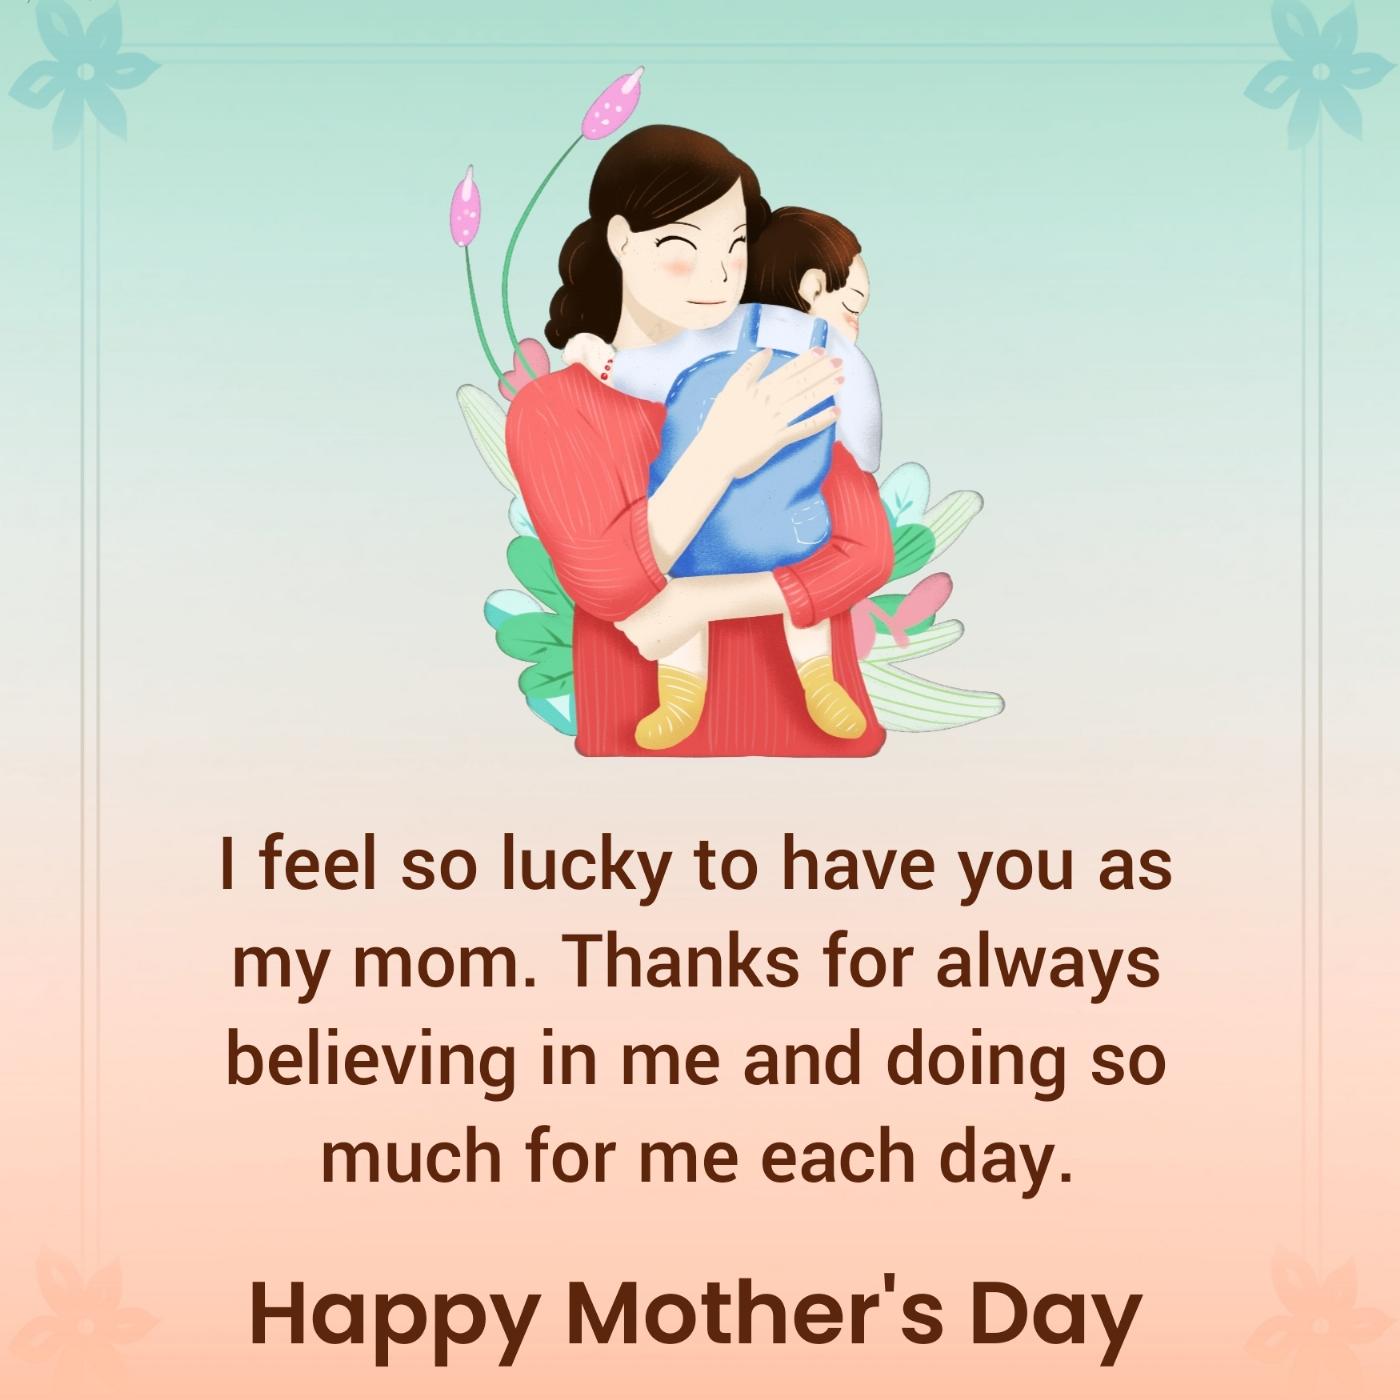 I feel so lucky to have you as my mom